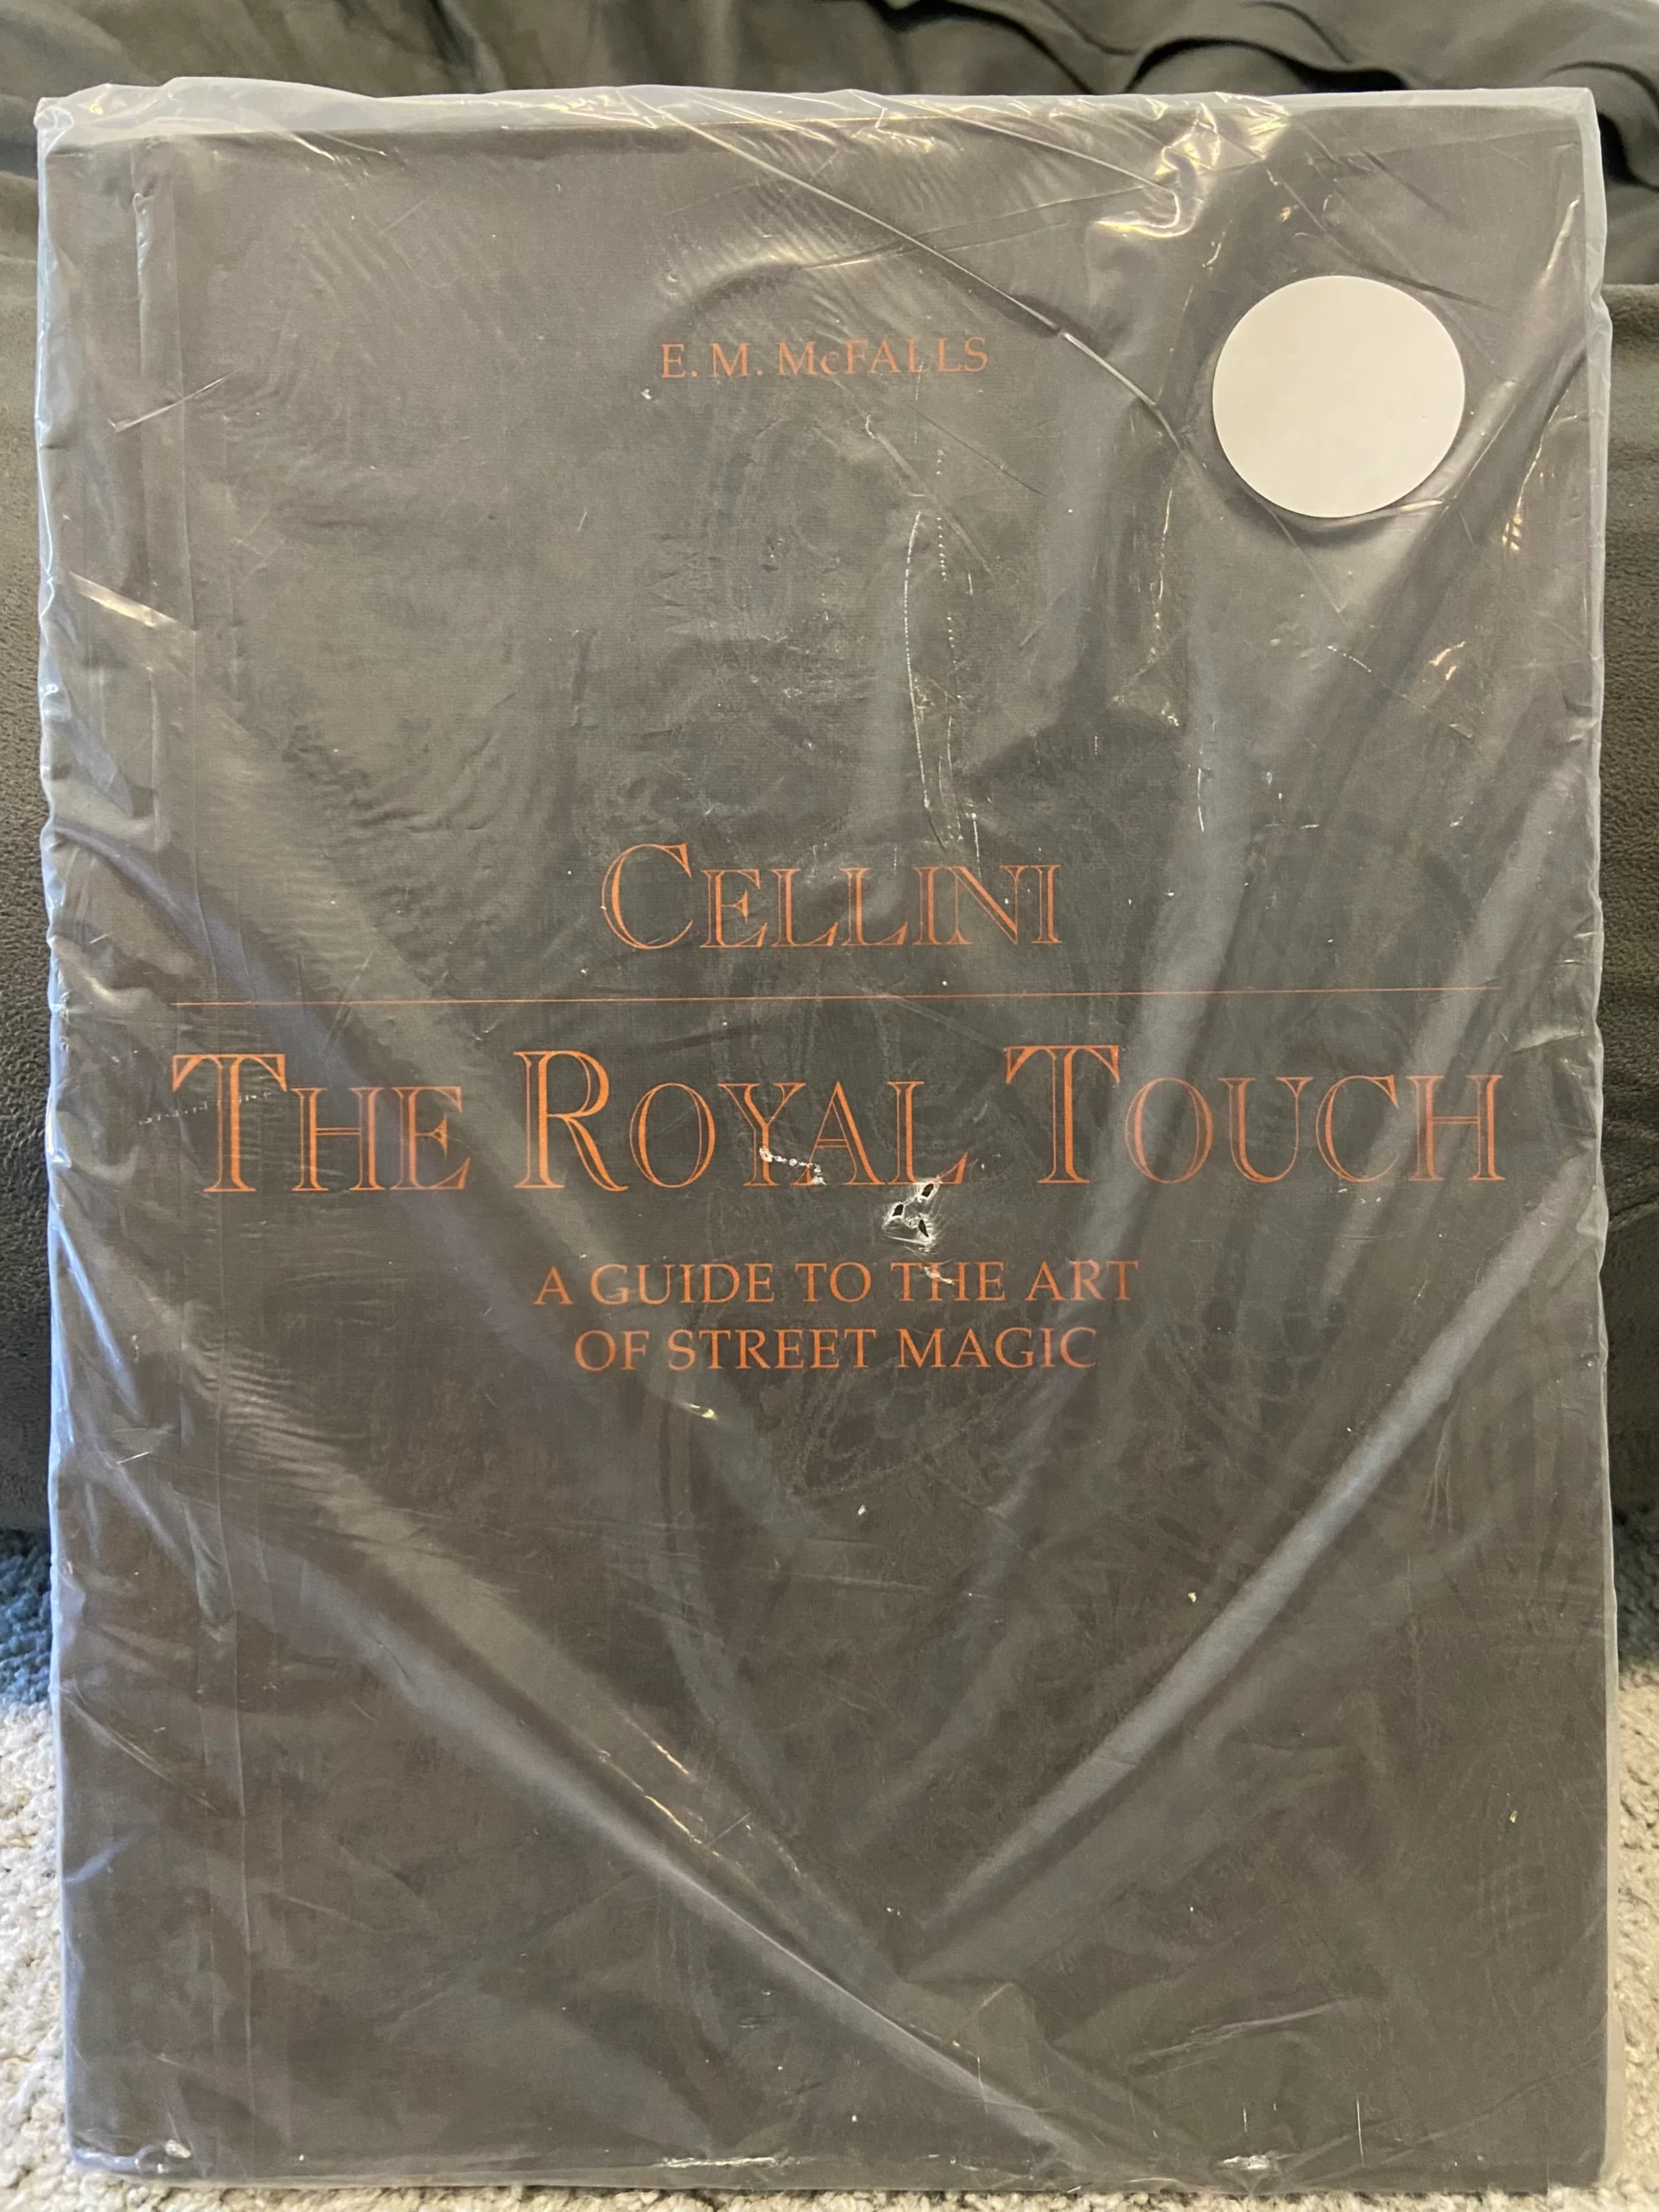 Cellini: The Royal Touch - EM McFalls